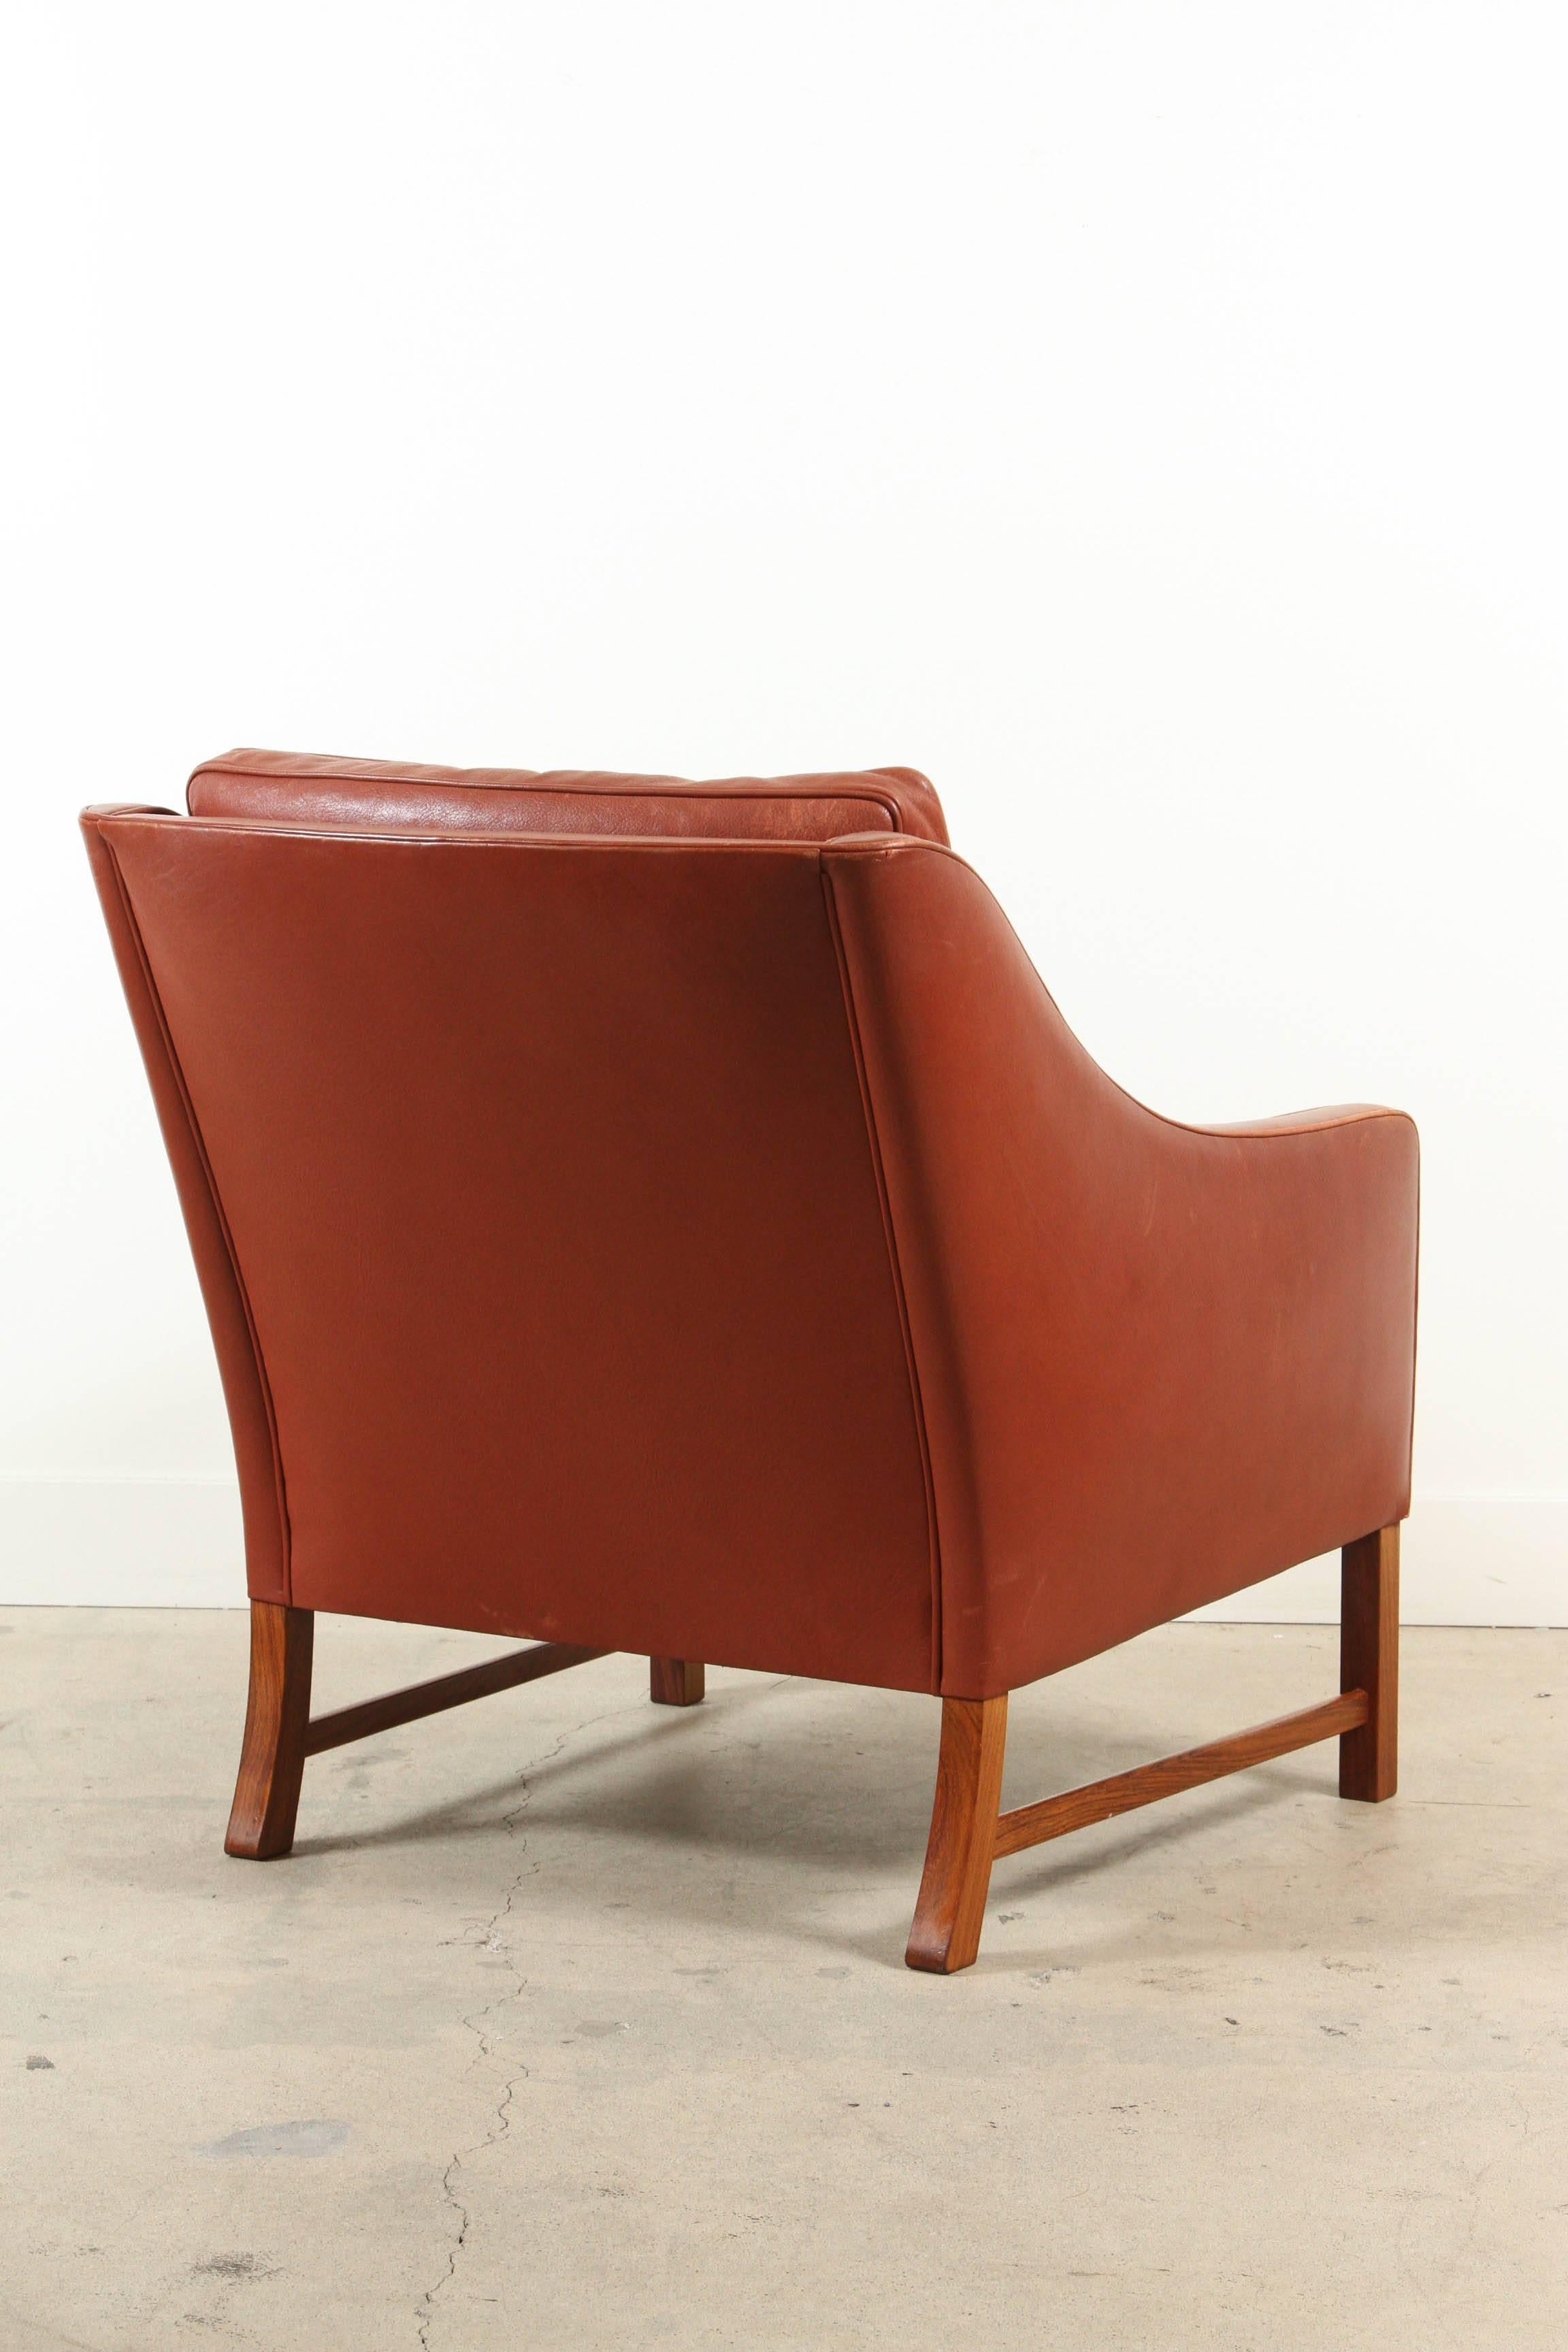 Danish Leather Club Chair by Frederik Kayser for Vatne Møbler 1